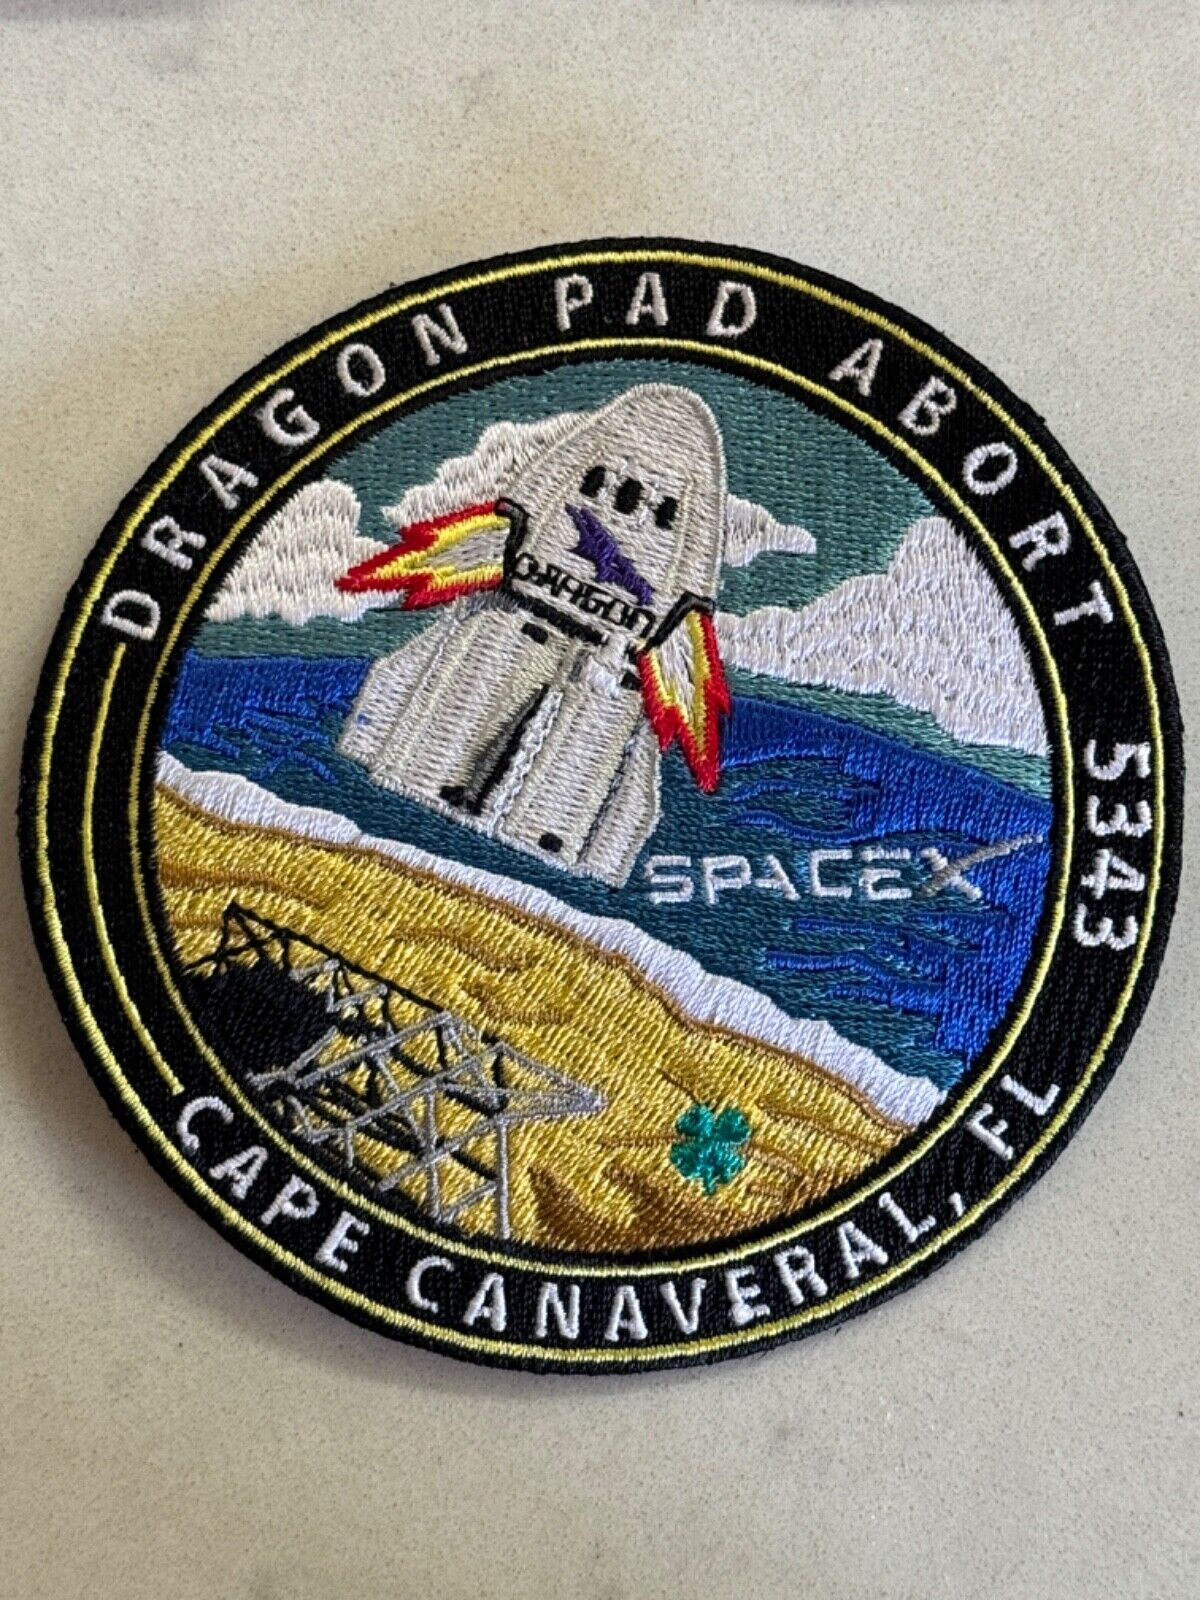 OFFICIAL SpaceX EMPLOYEE NUMBER Dragon Pad Abort Patch NASA Crew